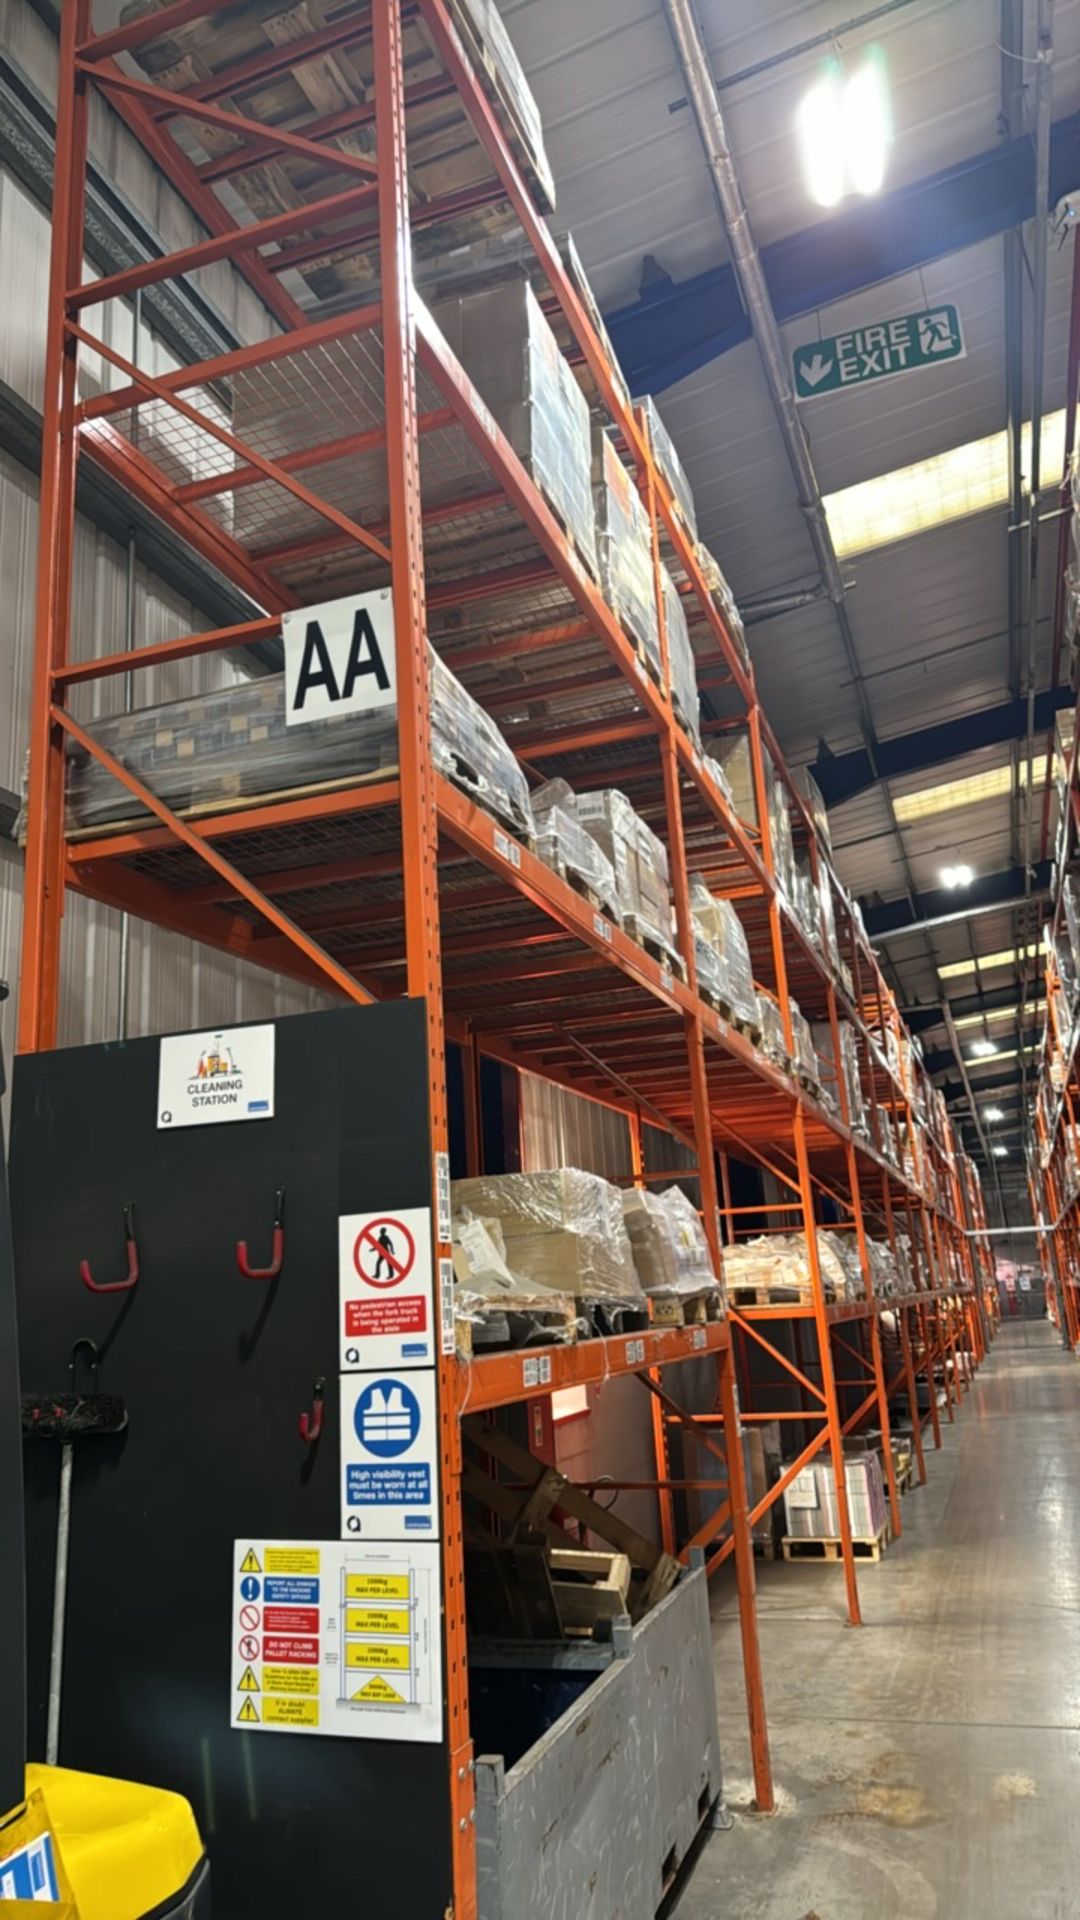 ref 9 - 23 Bays Of Boltless Pallet Racking - Image 2 of 10